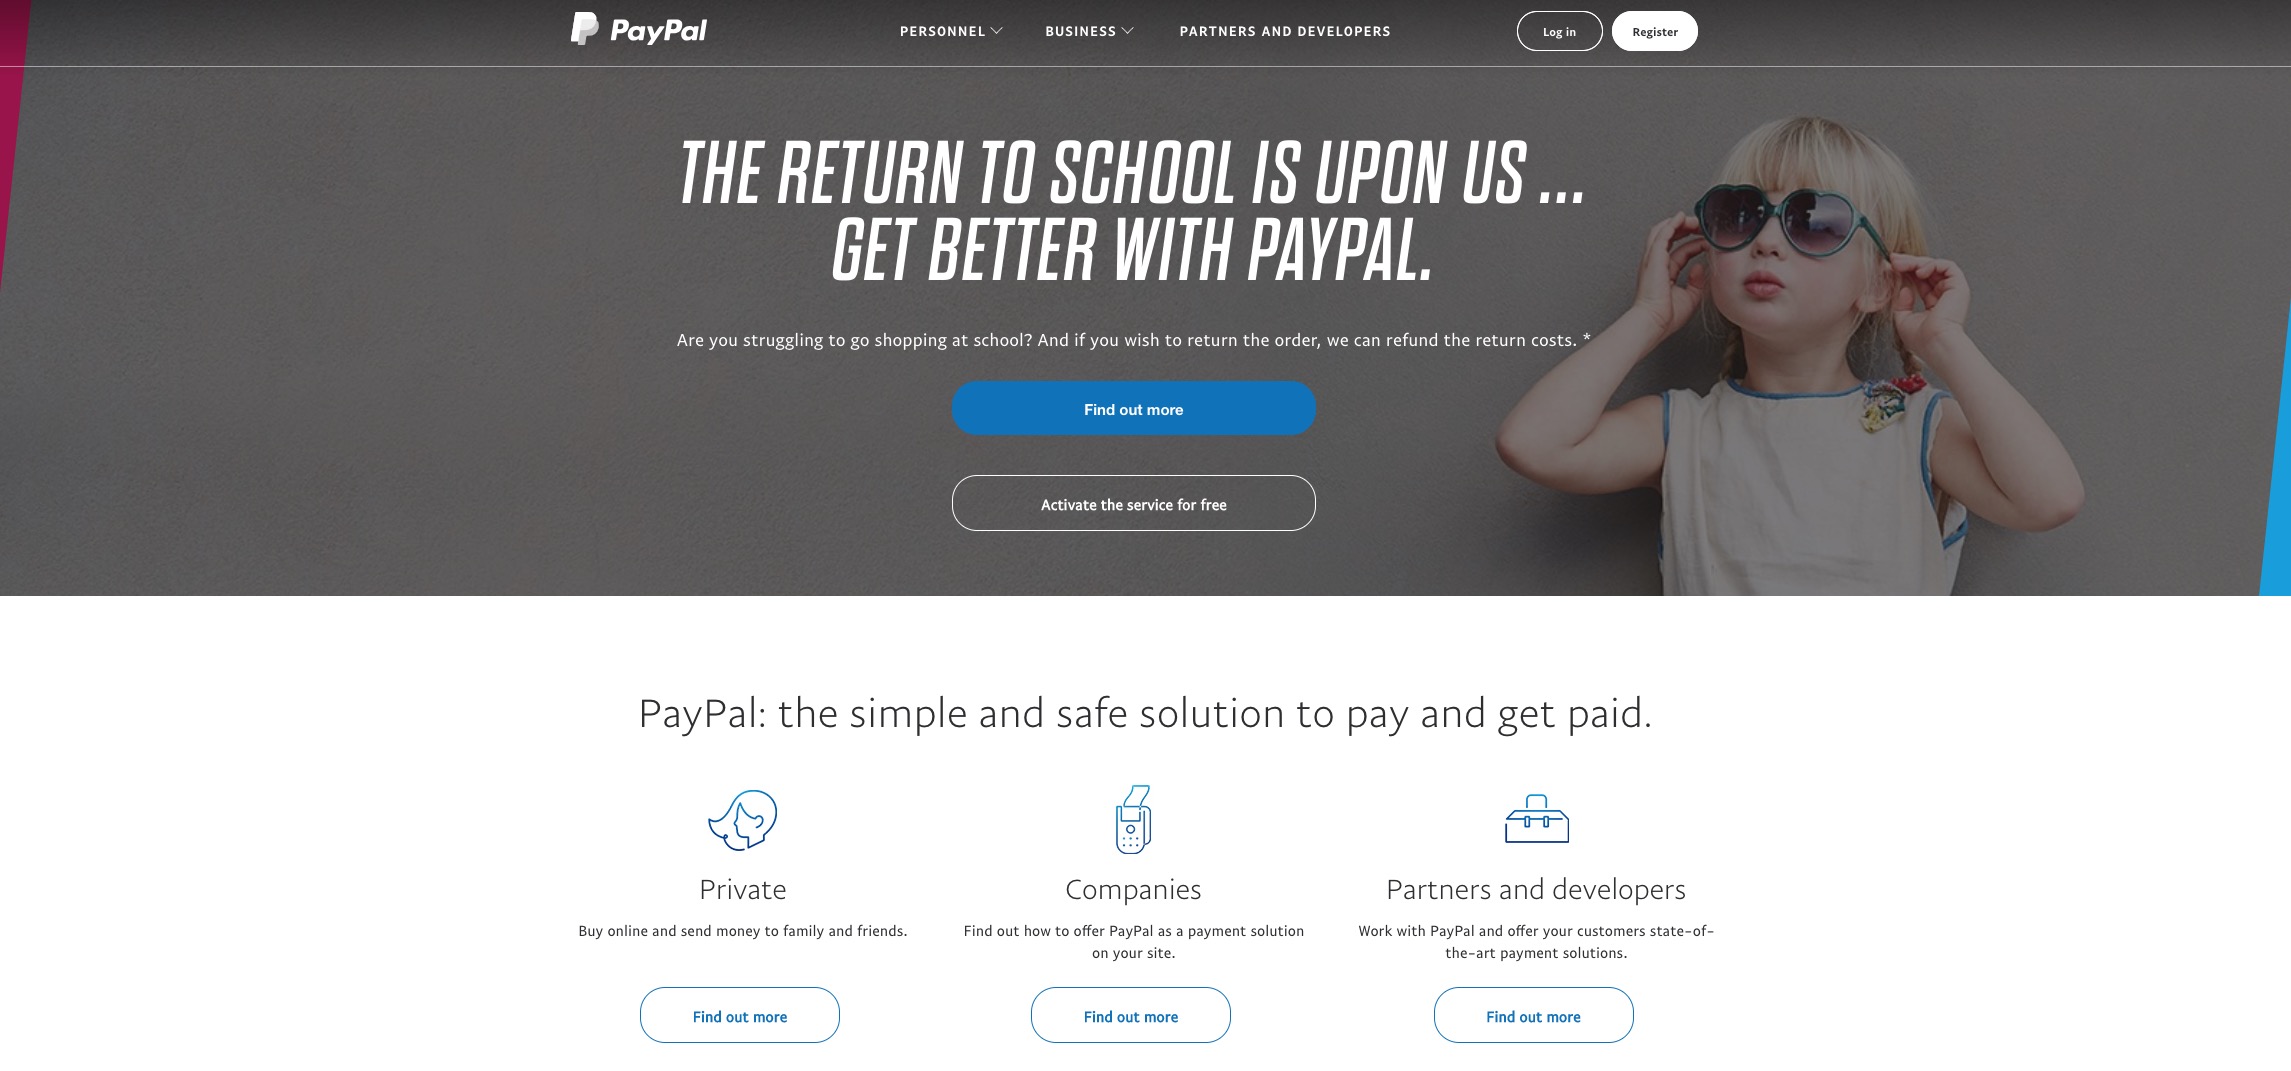 paypal2